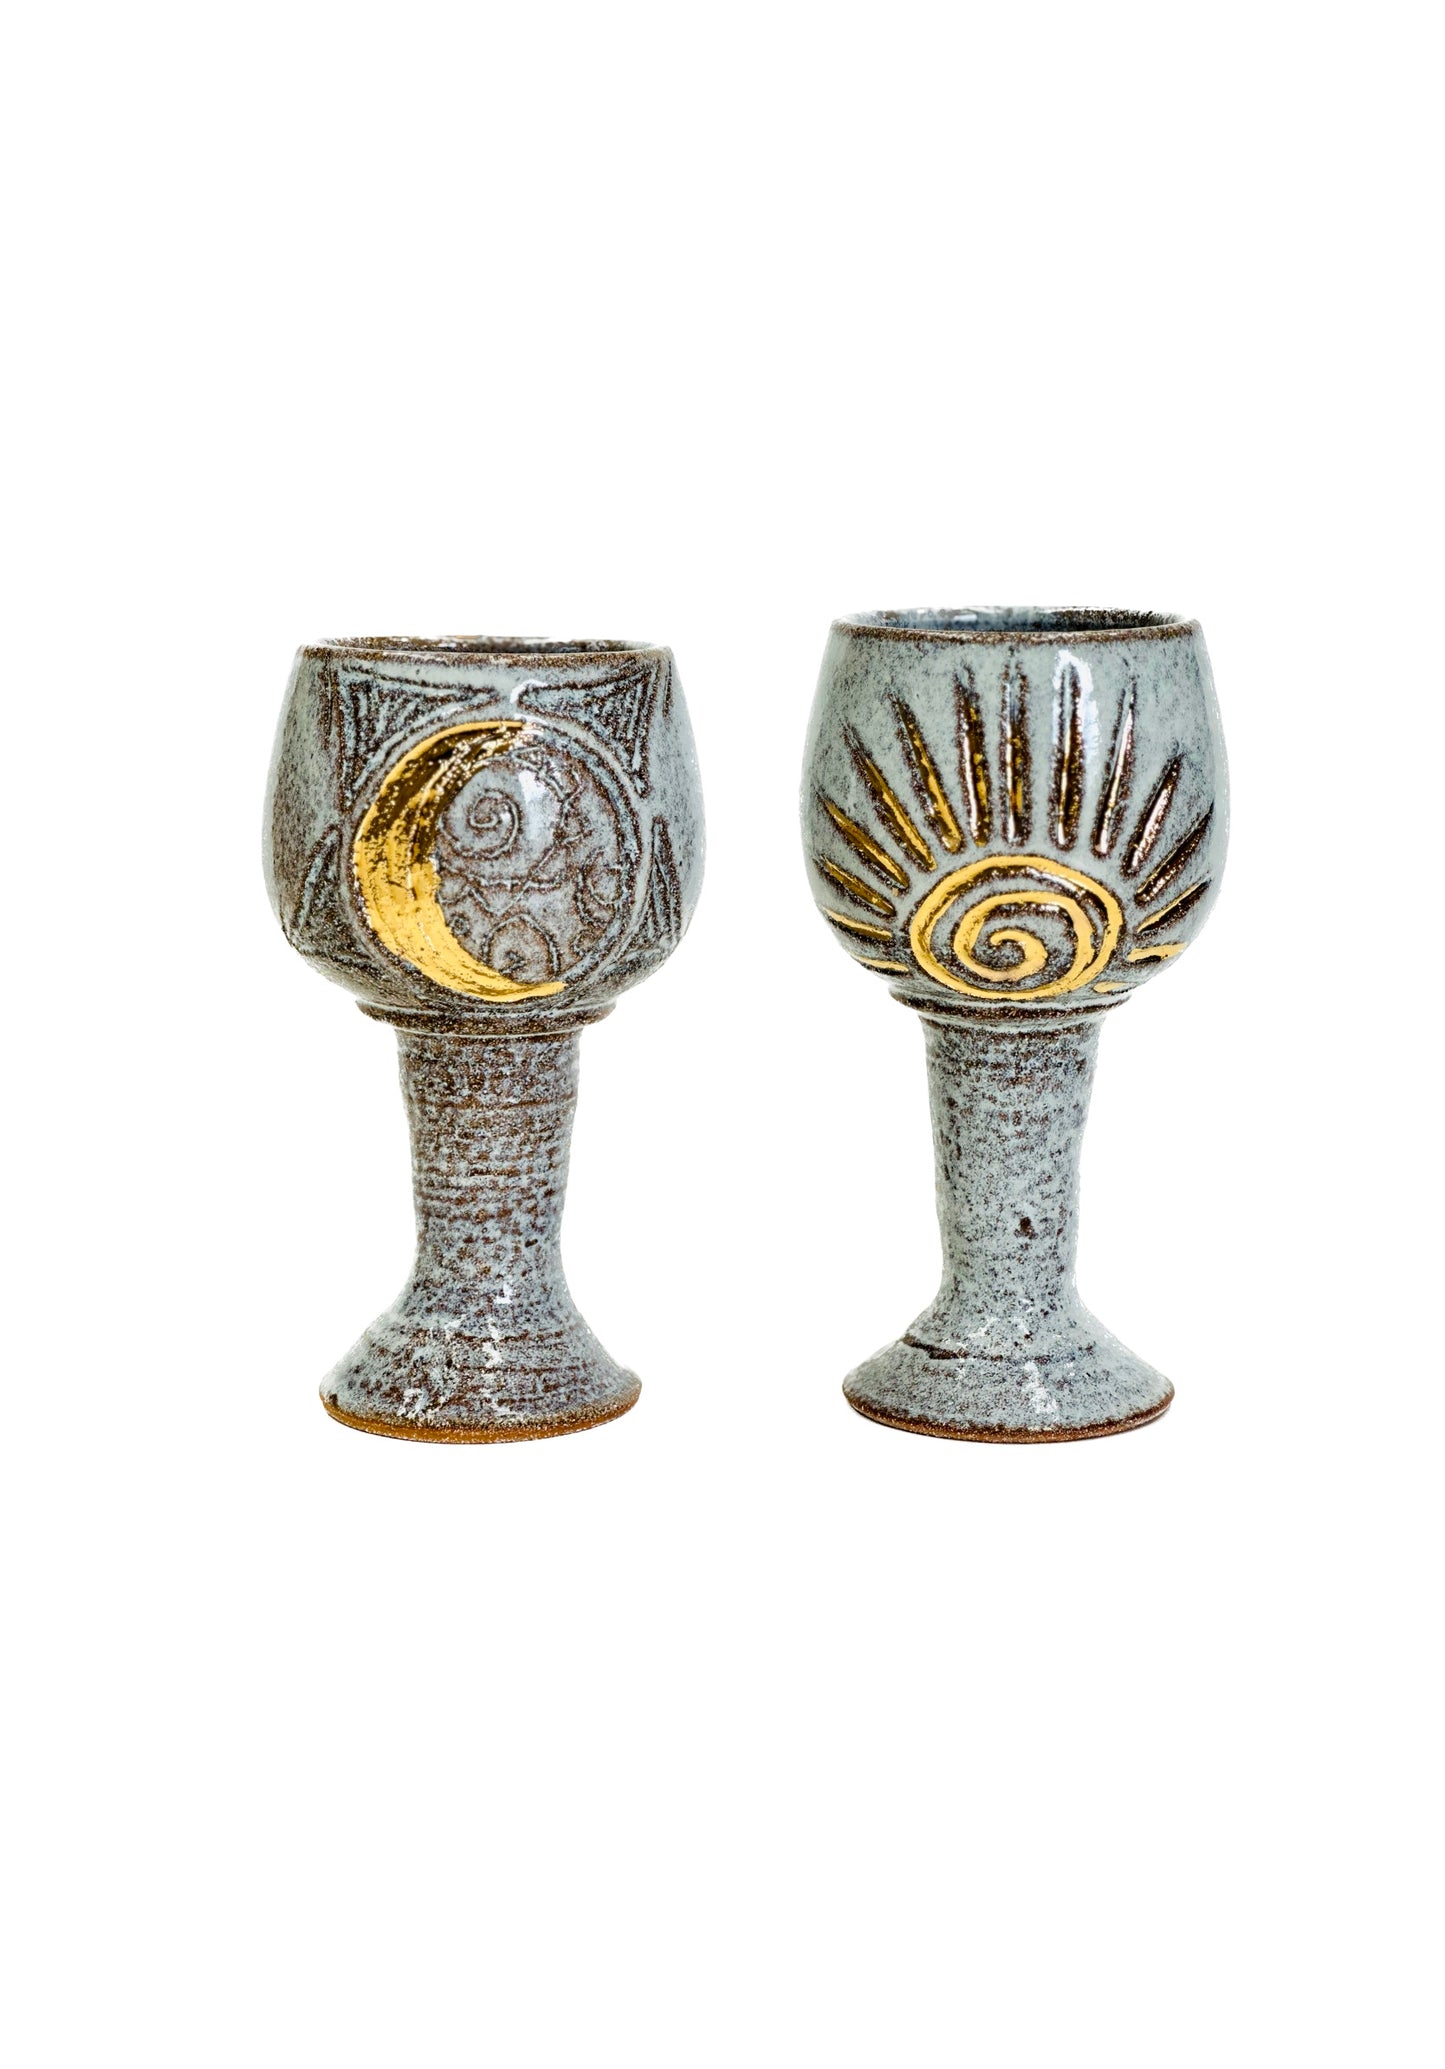 Rising Sun and Crescent Moon sacred moon goblet